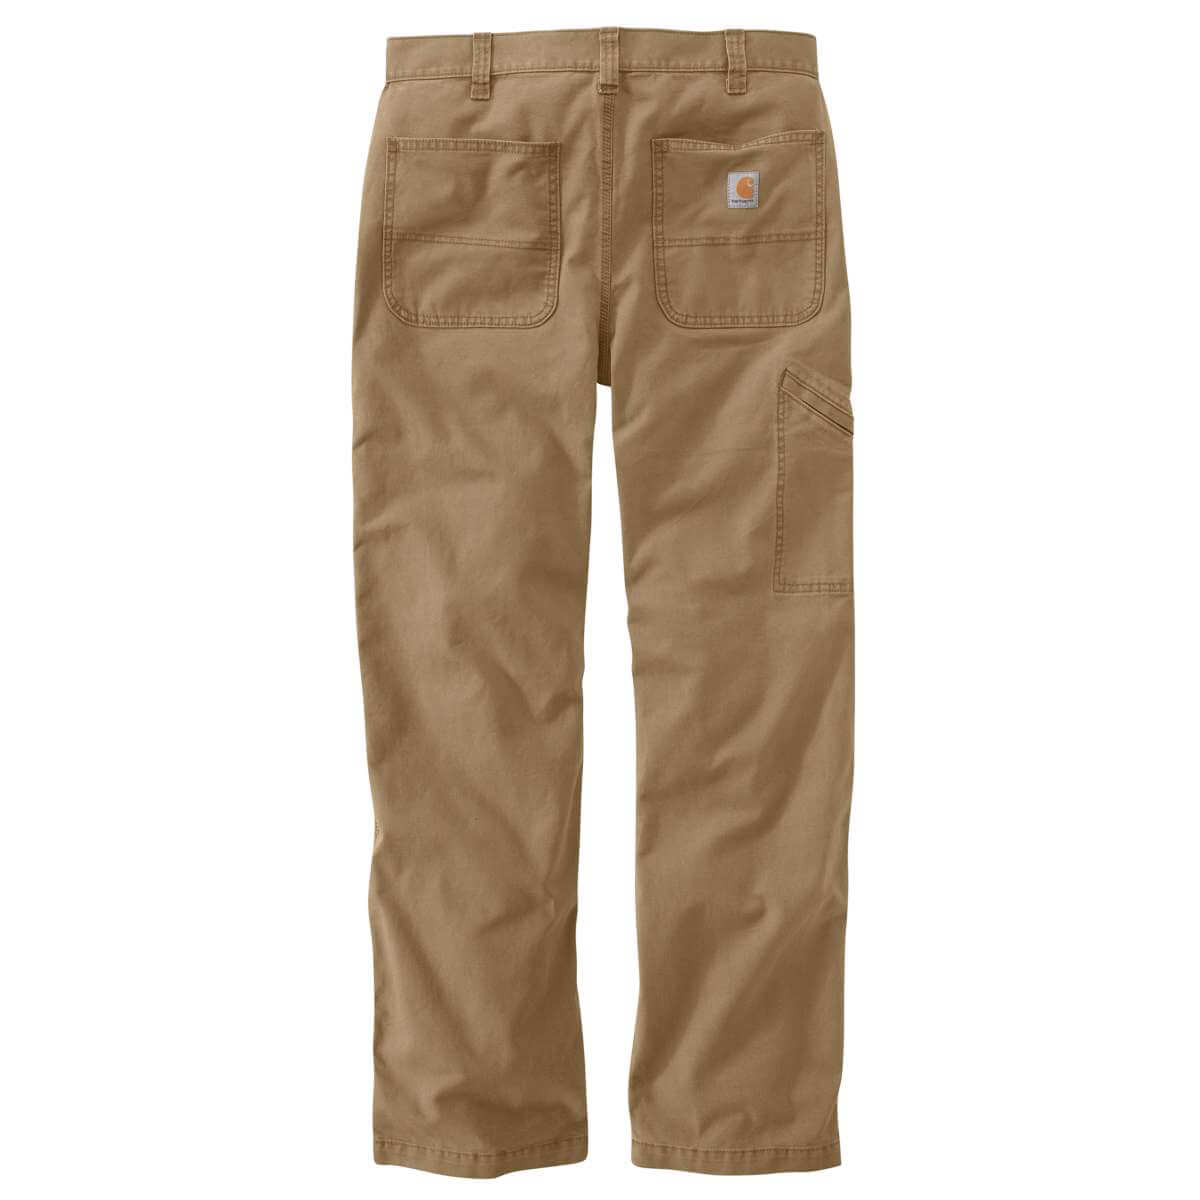 102291-rugged-flex-relaxed-fit-canvas-work-pant-khaki